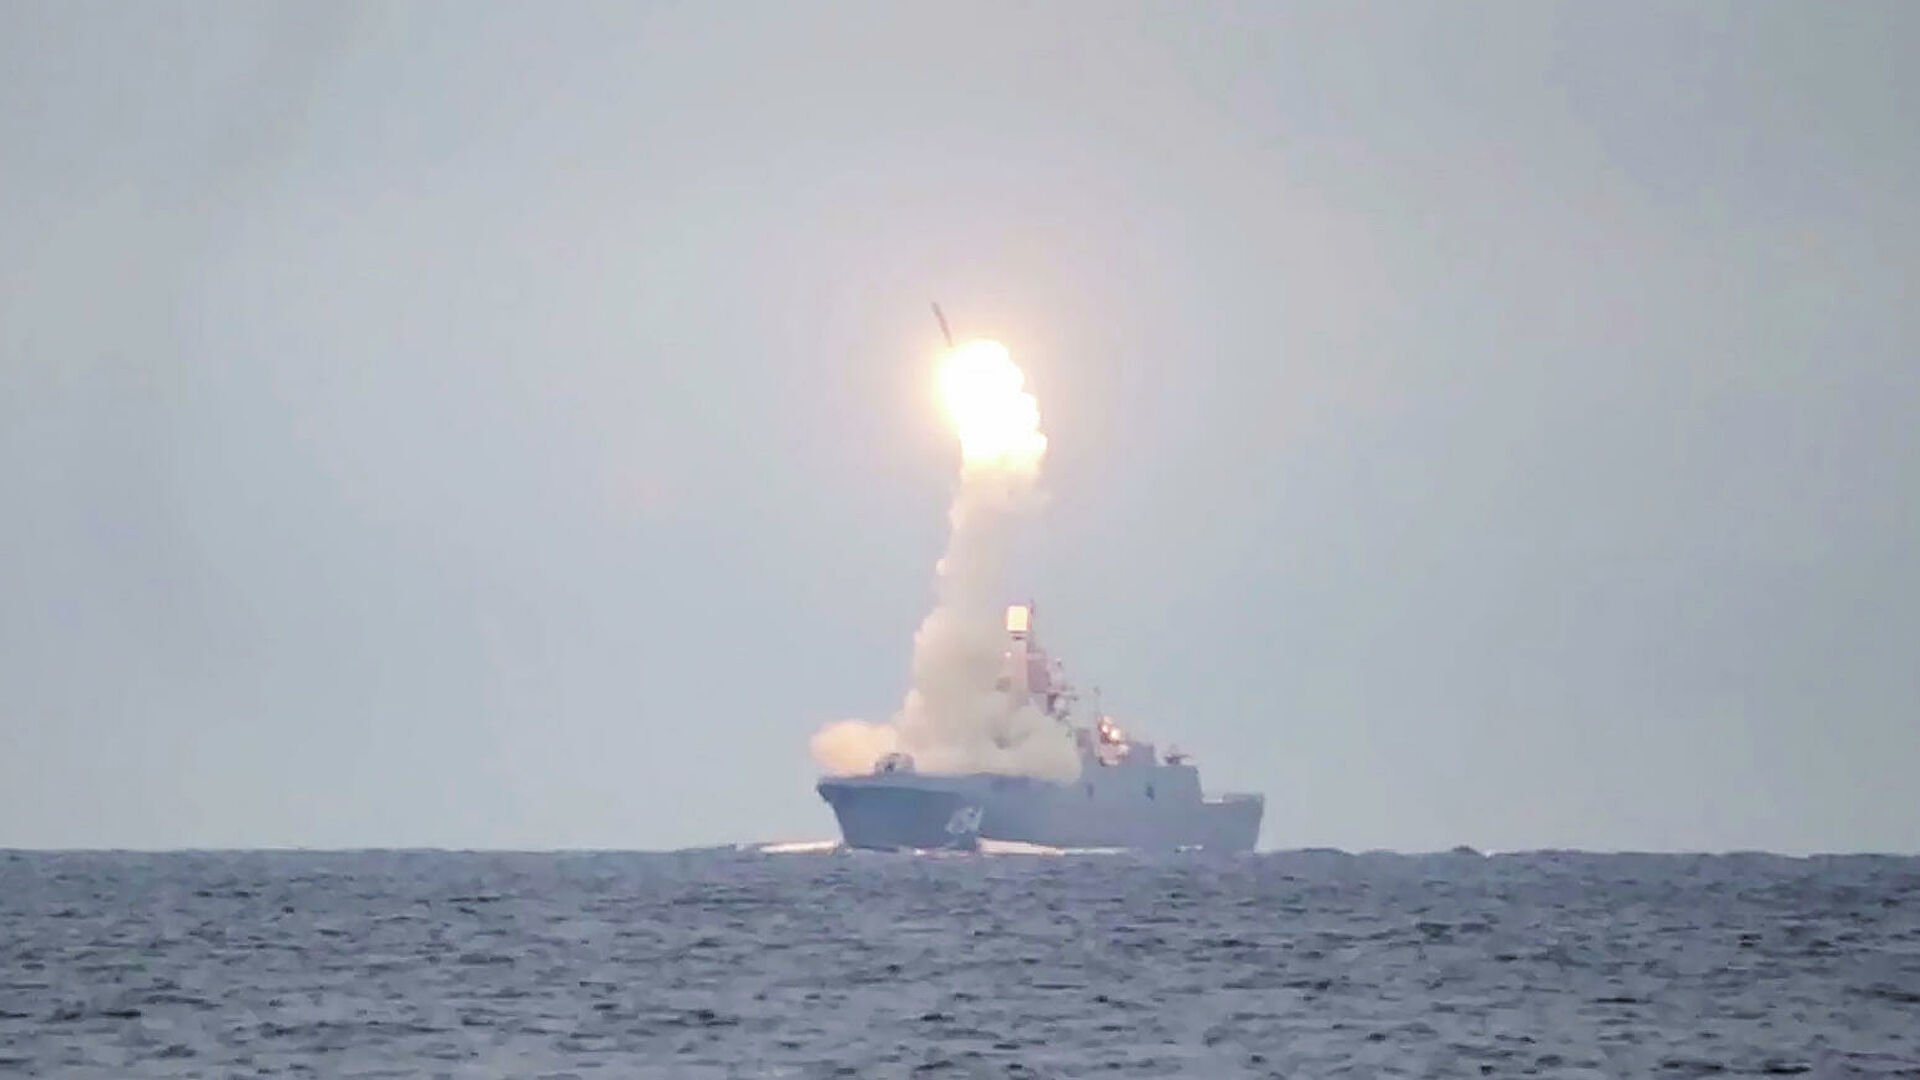 Russia successfully tested the Zircon hypersonic cruise missile